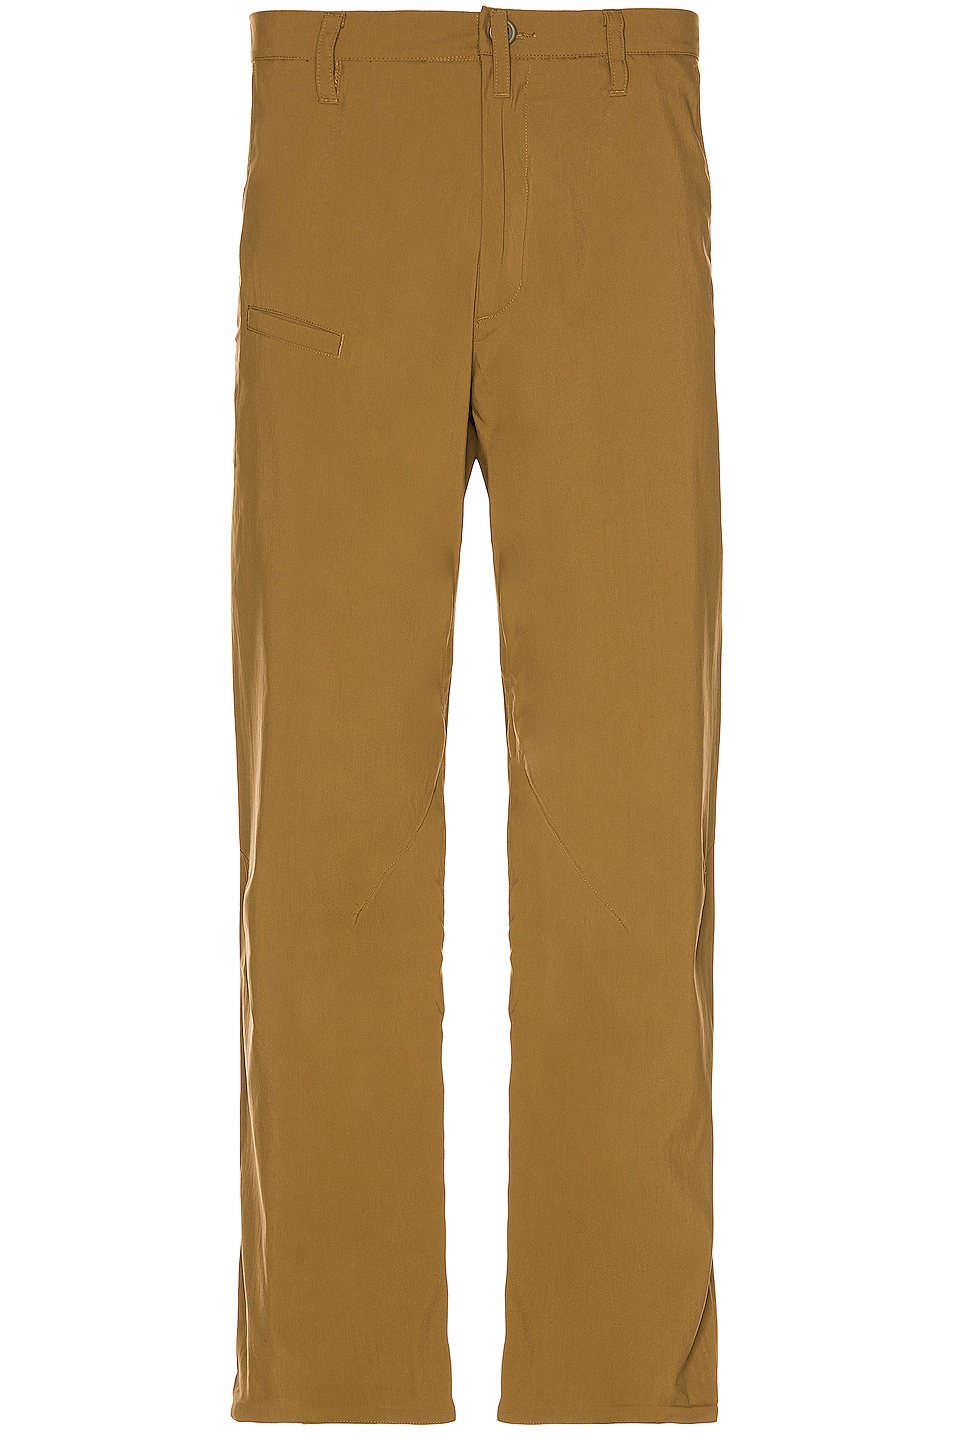 Image 1 of Acronym P39-M Nylon Stretch 8 Pocket Trouser in Coyote